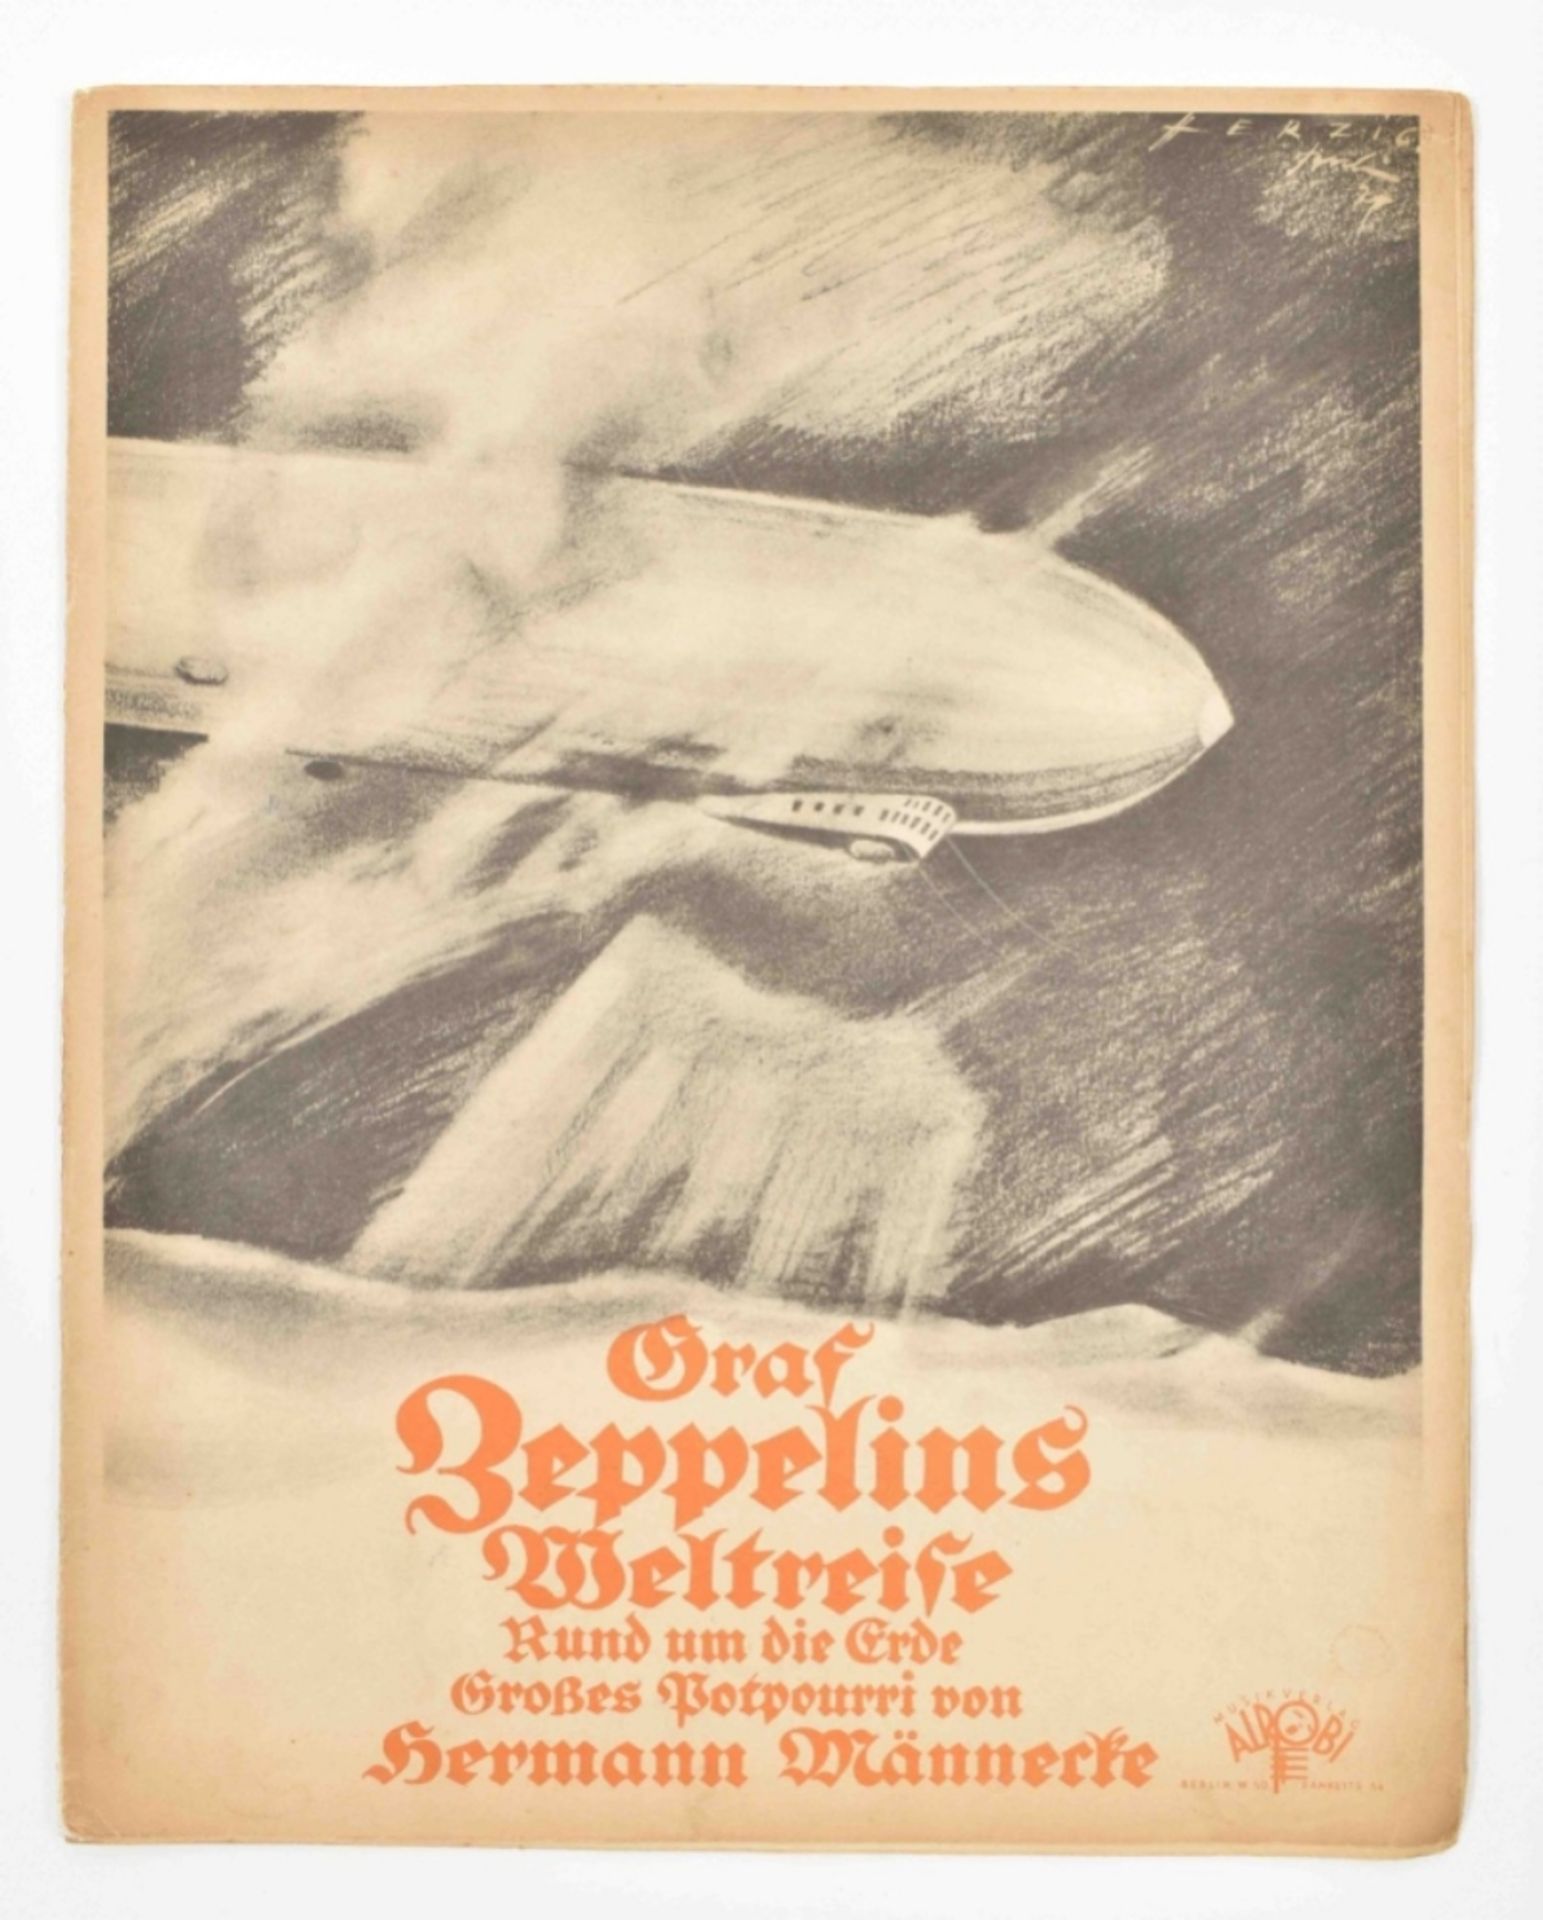 Collection of sheet music about airplanes, - Image 7 of 7